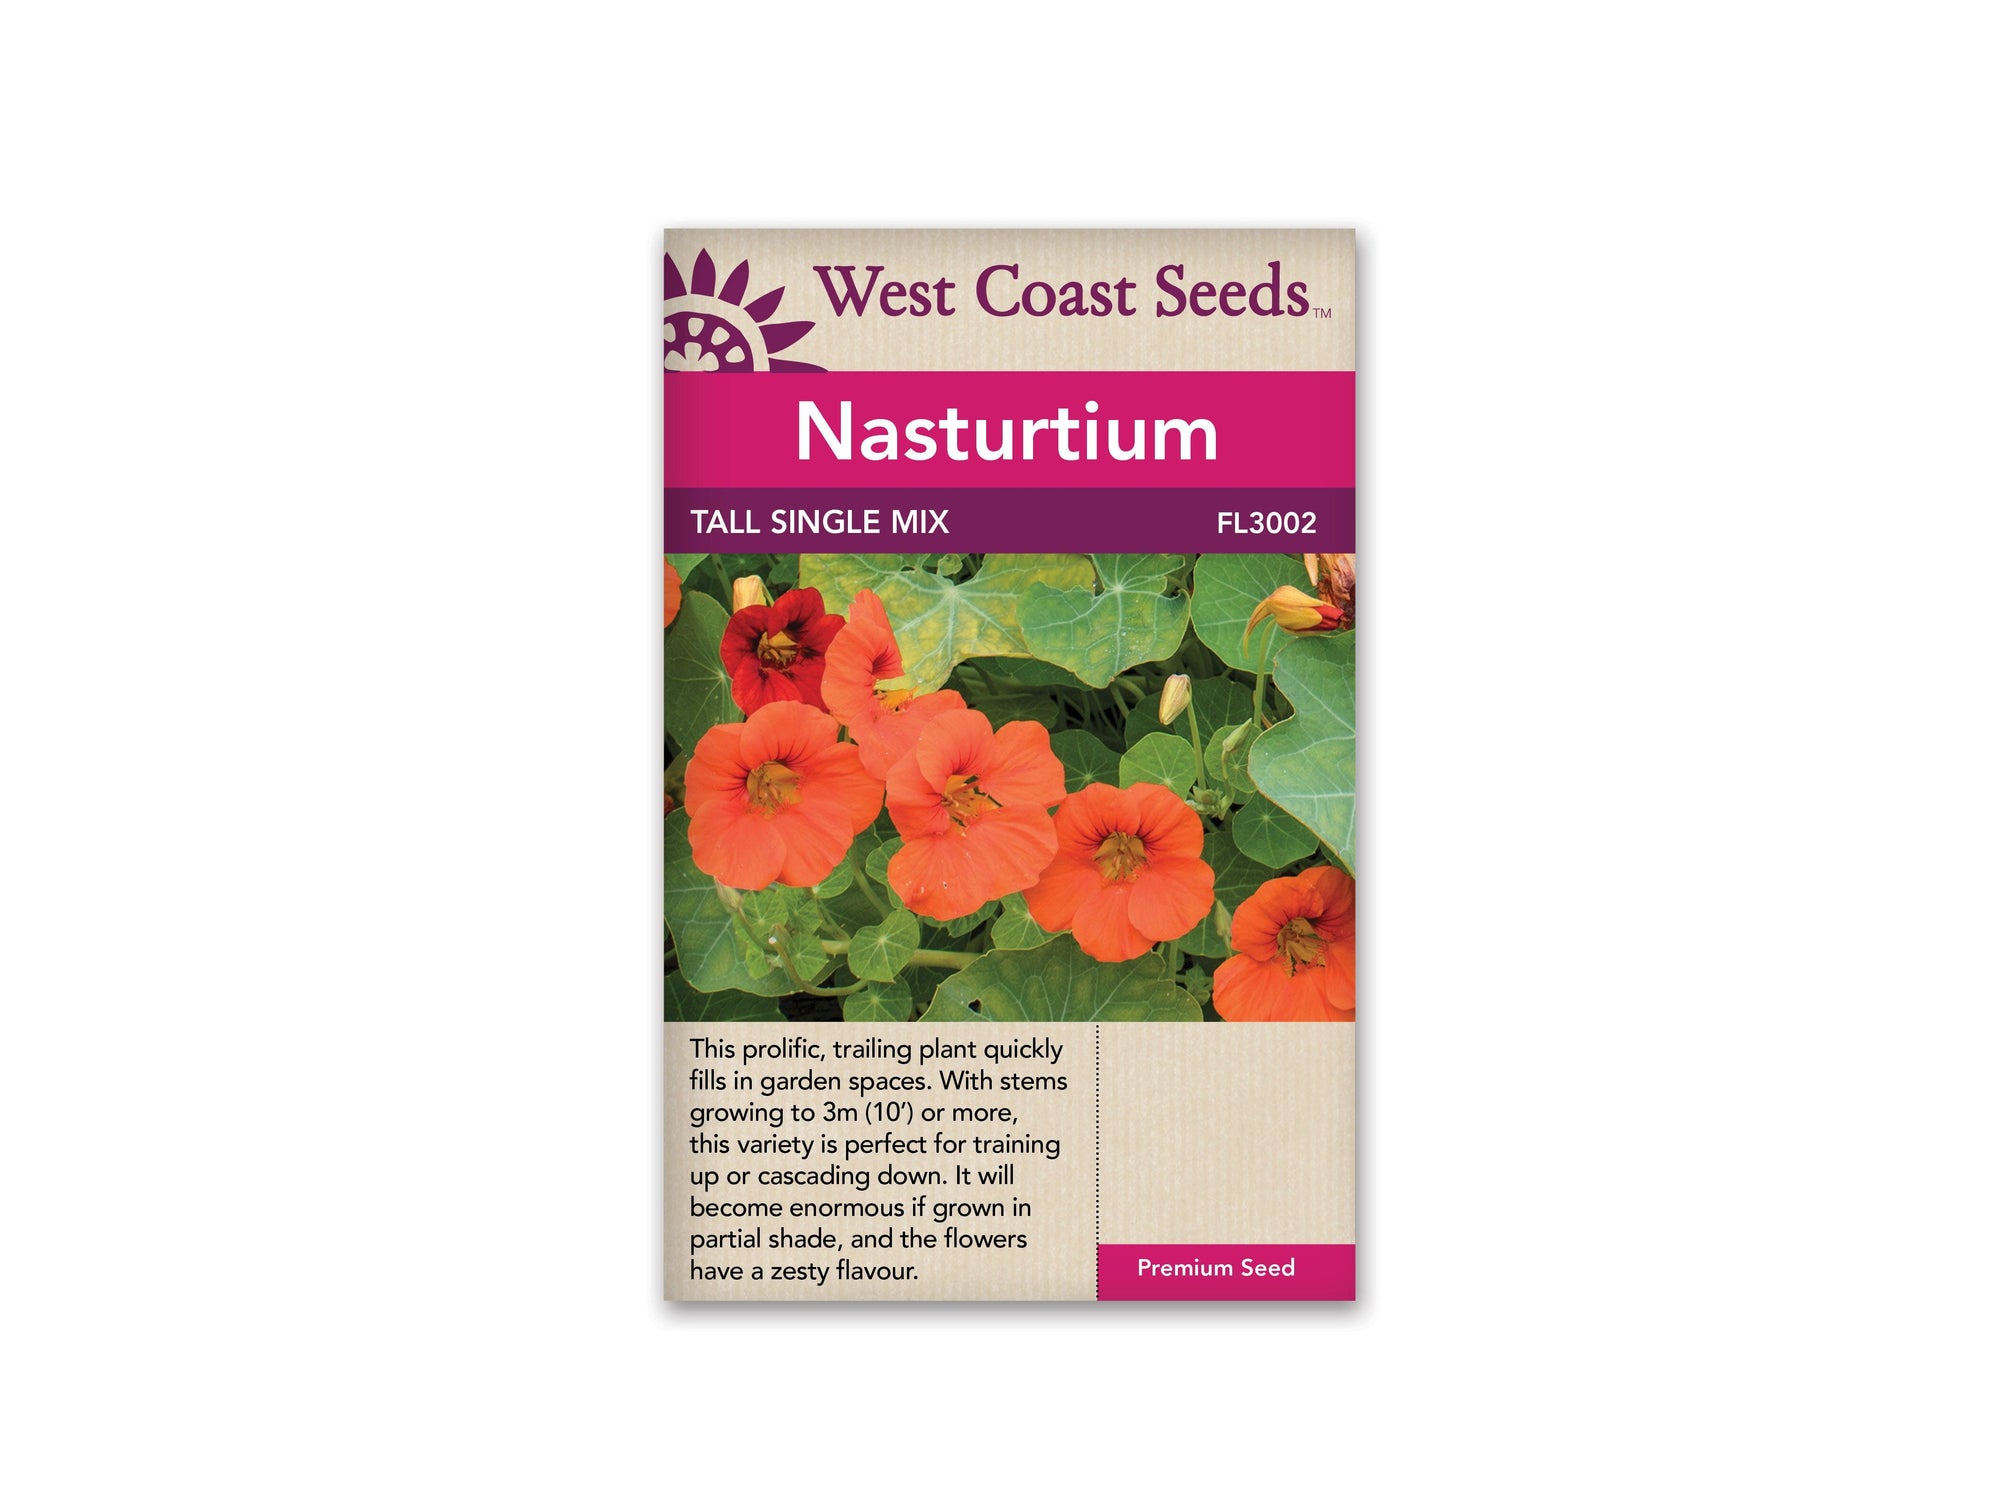 Add cheer to your garden with Nasturtiums Tall Single Mix. These lively, trailing plants thrive in sun or shade, and can reach a height of 3m. They're perfect for filling gaps in fences, archways, and gardens, and they provide a stunning burst of color that will entice you and your guests. Enjoy the cheerful blossoms of Nasturtiums Tall Single Mix this season.